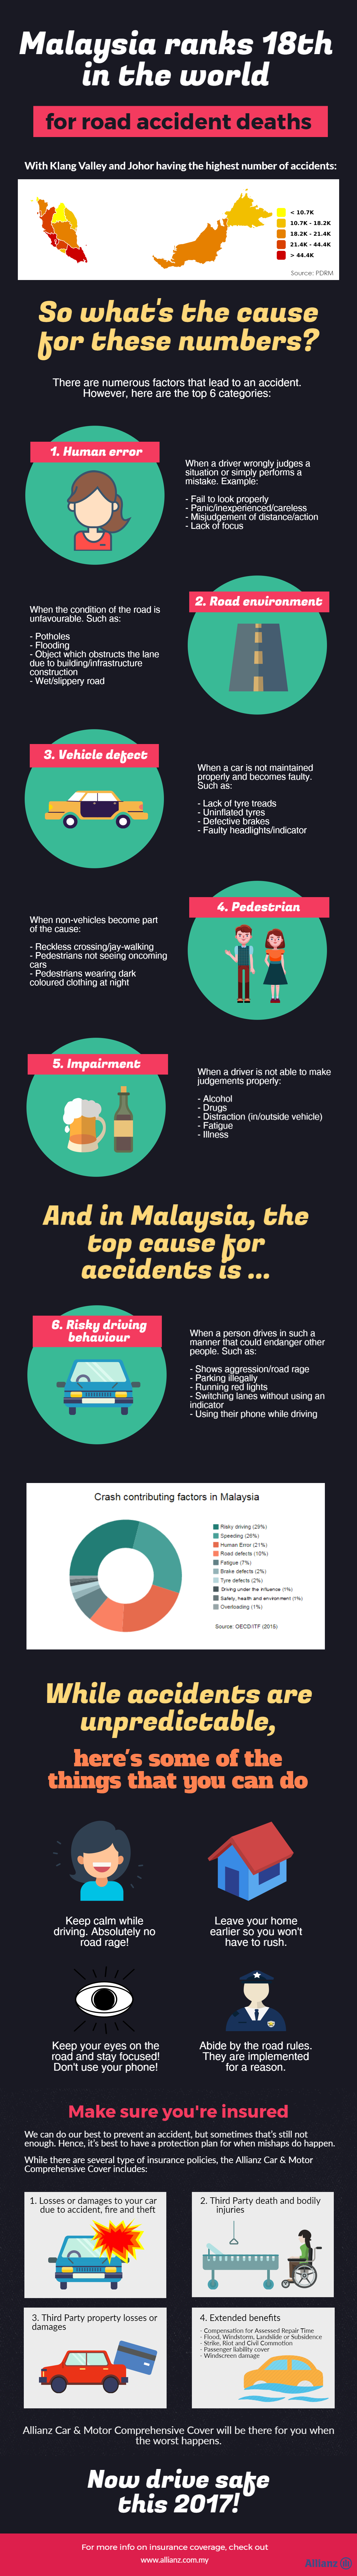 [Test] Why Is Malaysia Ranked 18Th In The World For Number Of Road Accidents? - World Of Buzz